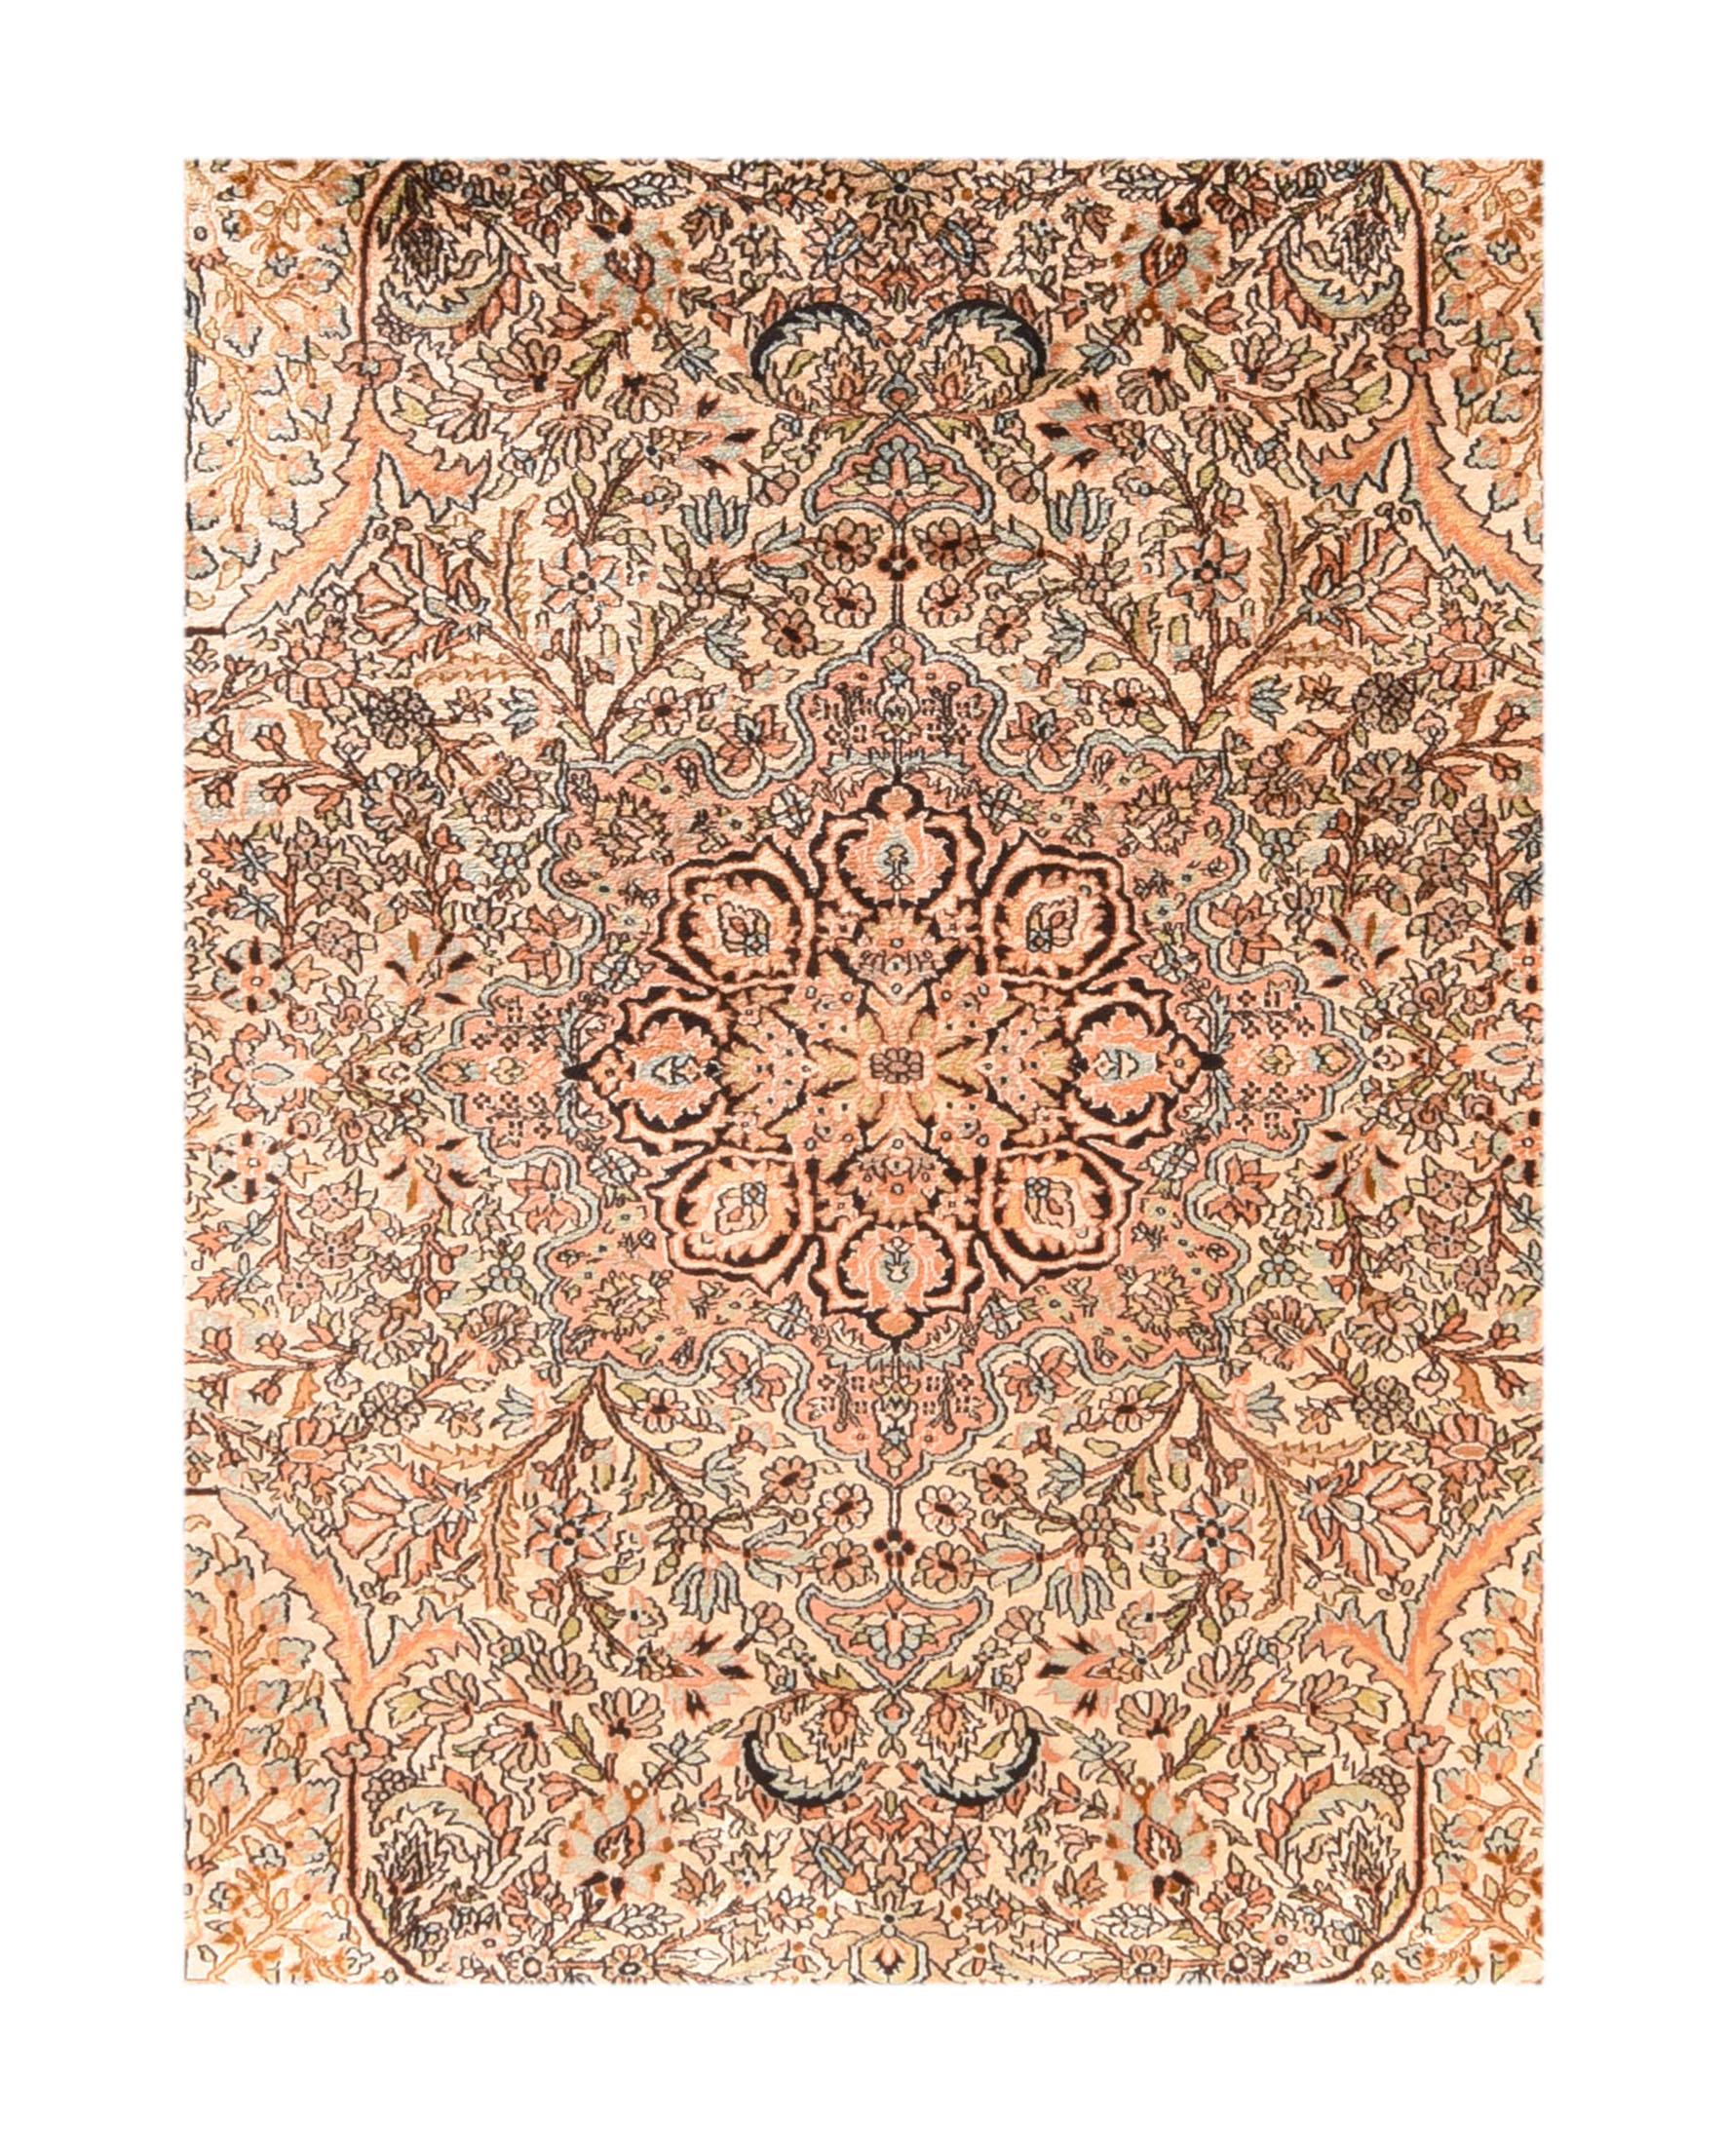 Extremely fine vintage Kashmiri rug, silk on silk, hand knotted, circa 1950s

Design: Medalion

A Kashmir rug is a hand knotted oriental rug from Kashmir which is associated with Kashmiri handicrafts. Kashmir rugs or carpets have intricate